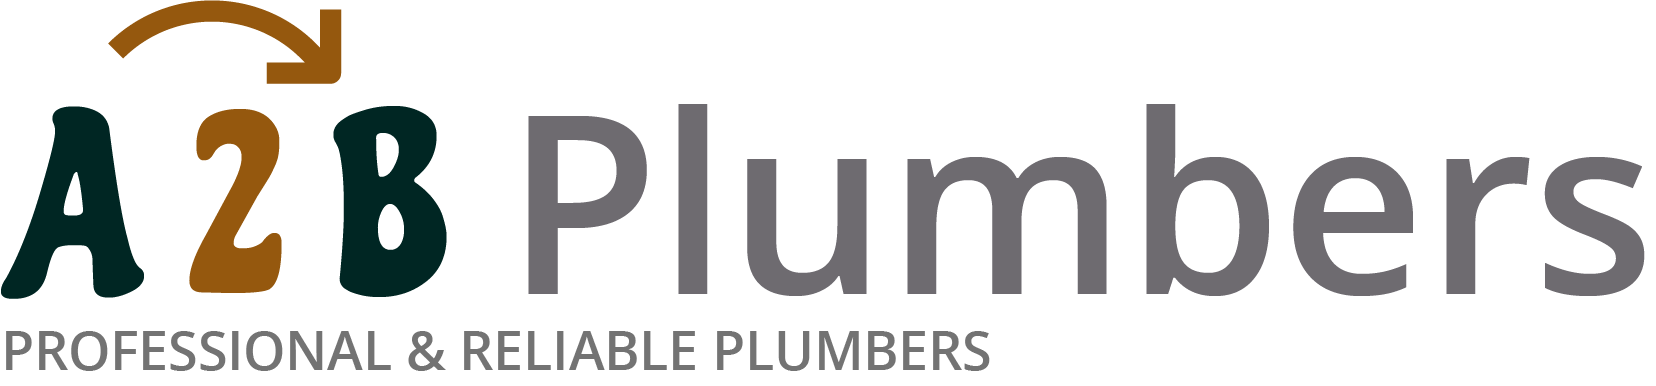 If you need a boiler installed, a radiator repaired or a leaking tap fixed, call us now - we provide services for properties in Plymouth and the local area.